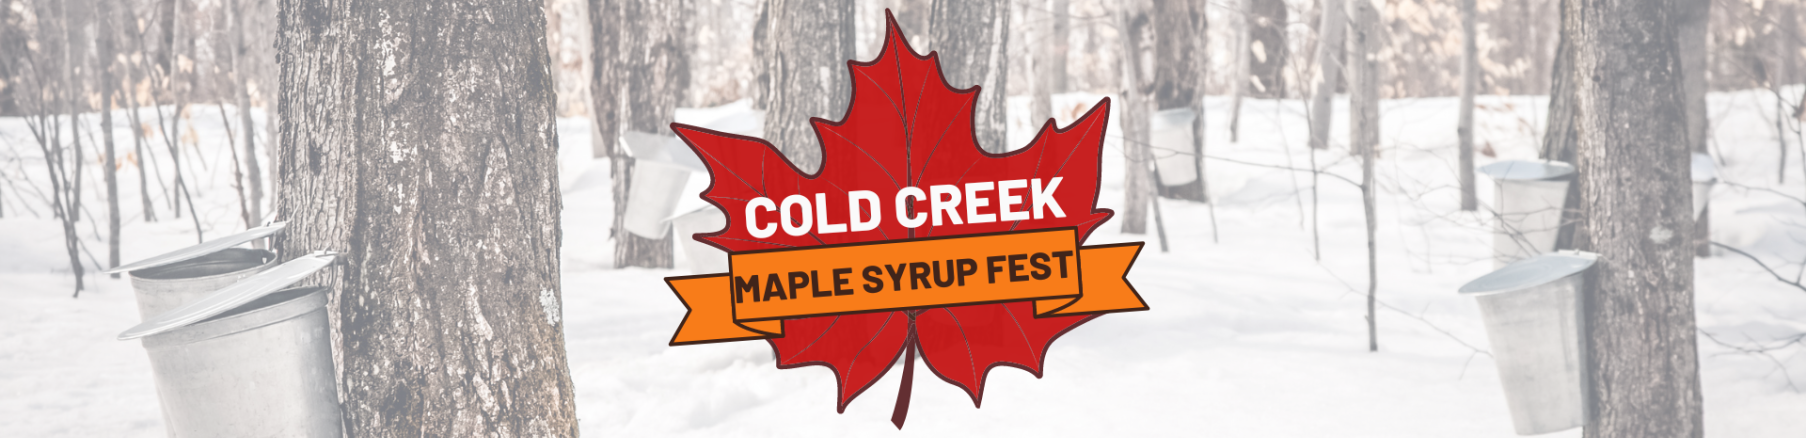 Cold Creek Maple Syrup Fest